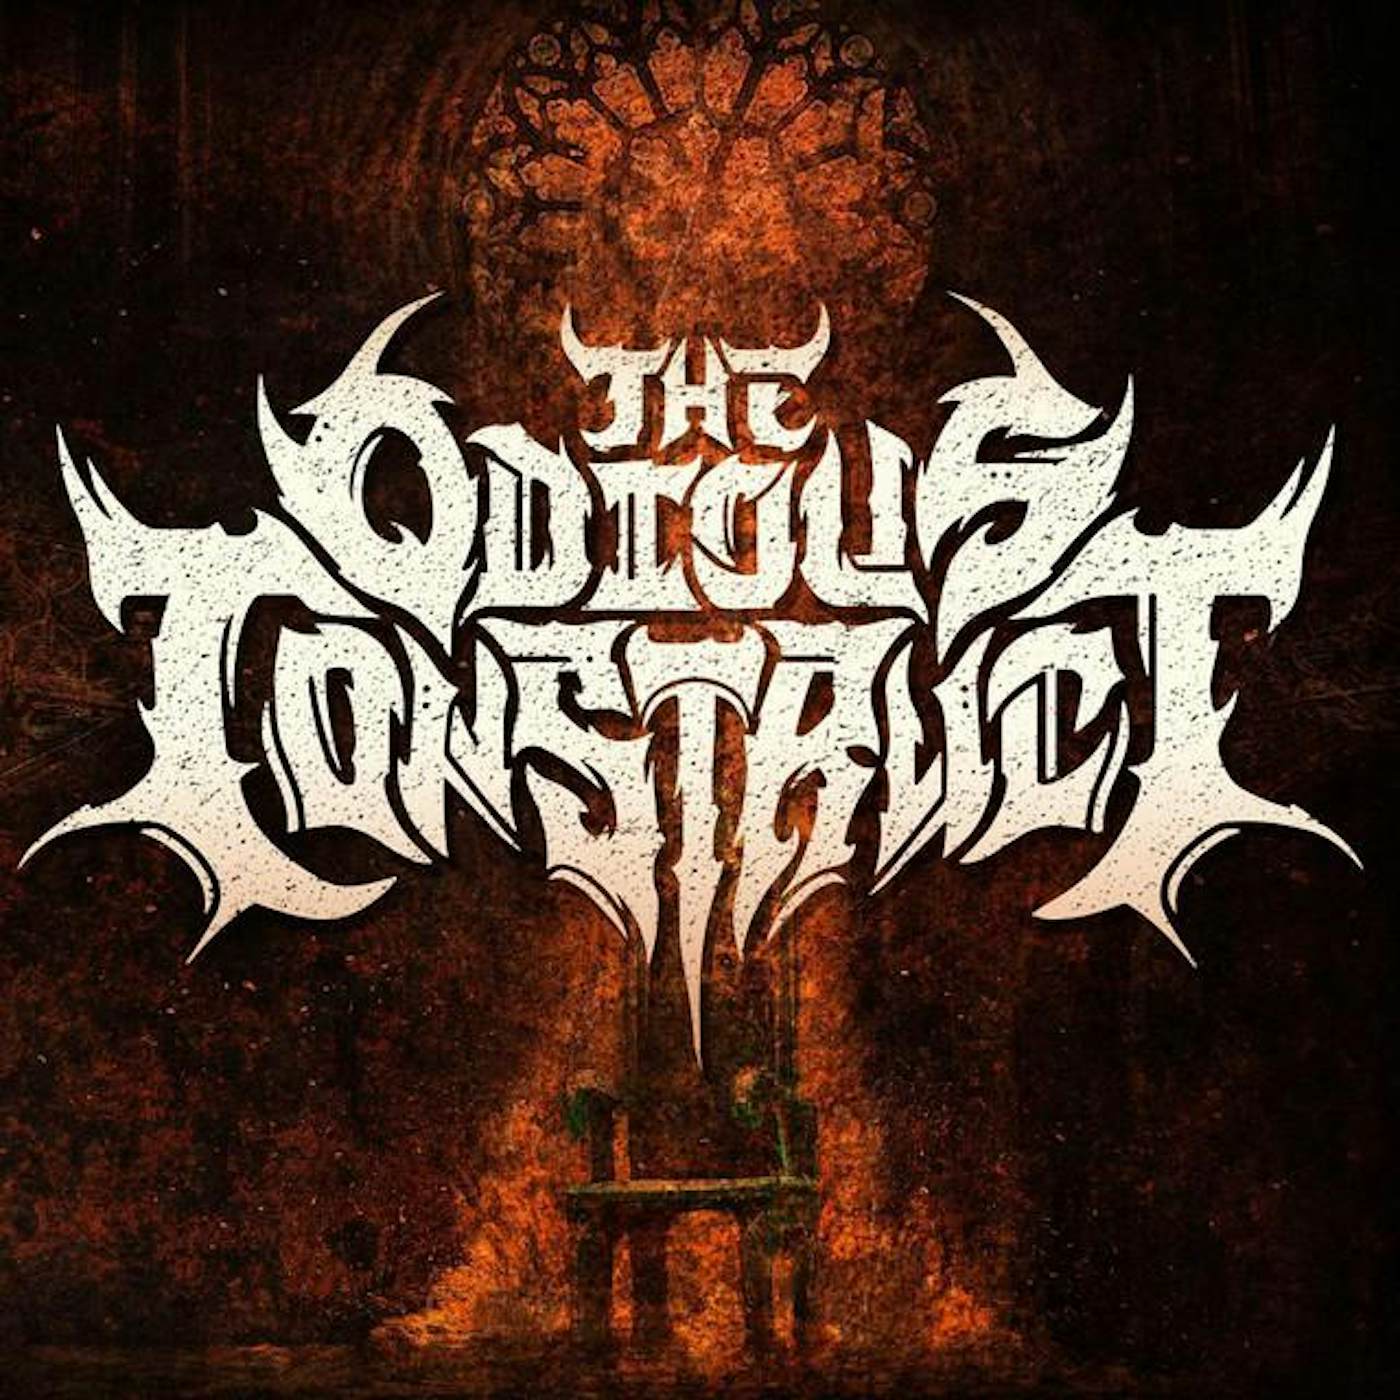 The Odious Construct